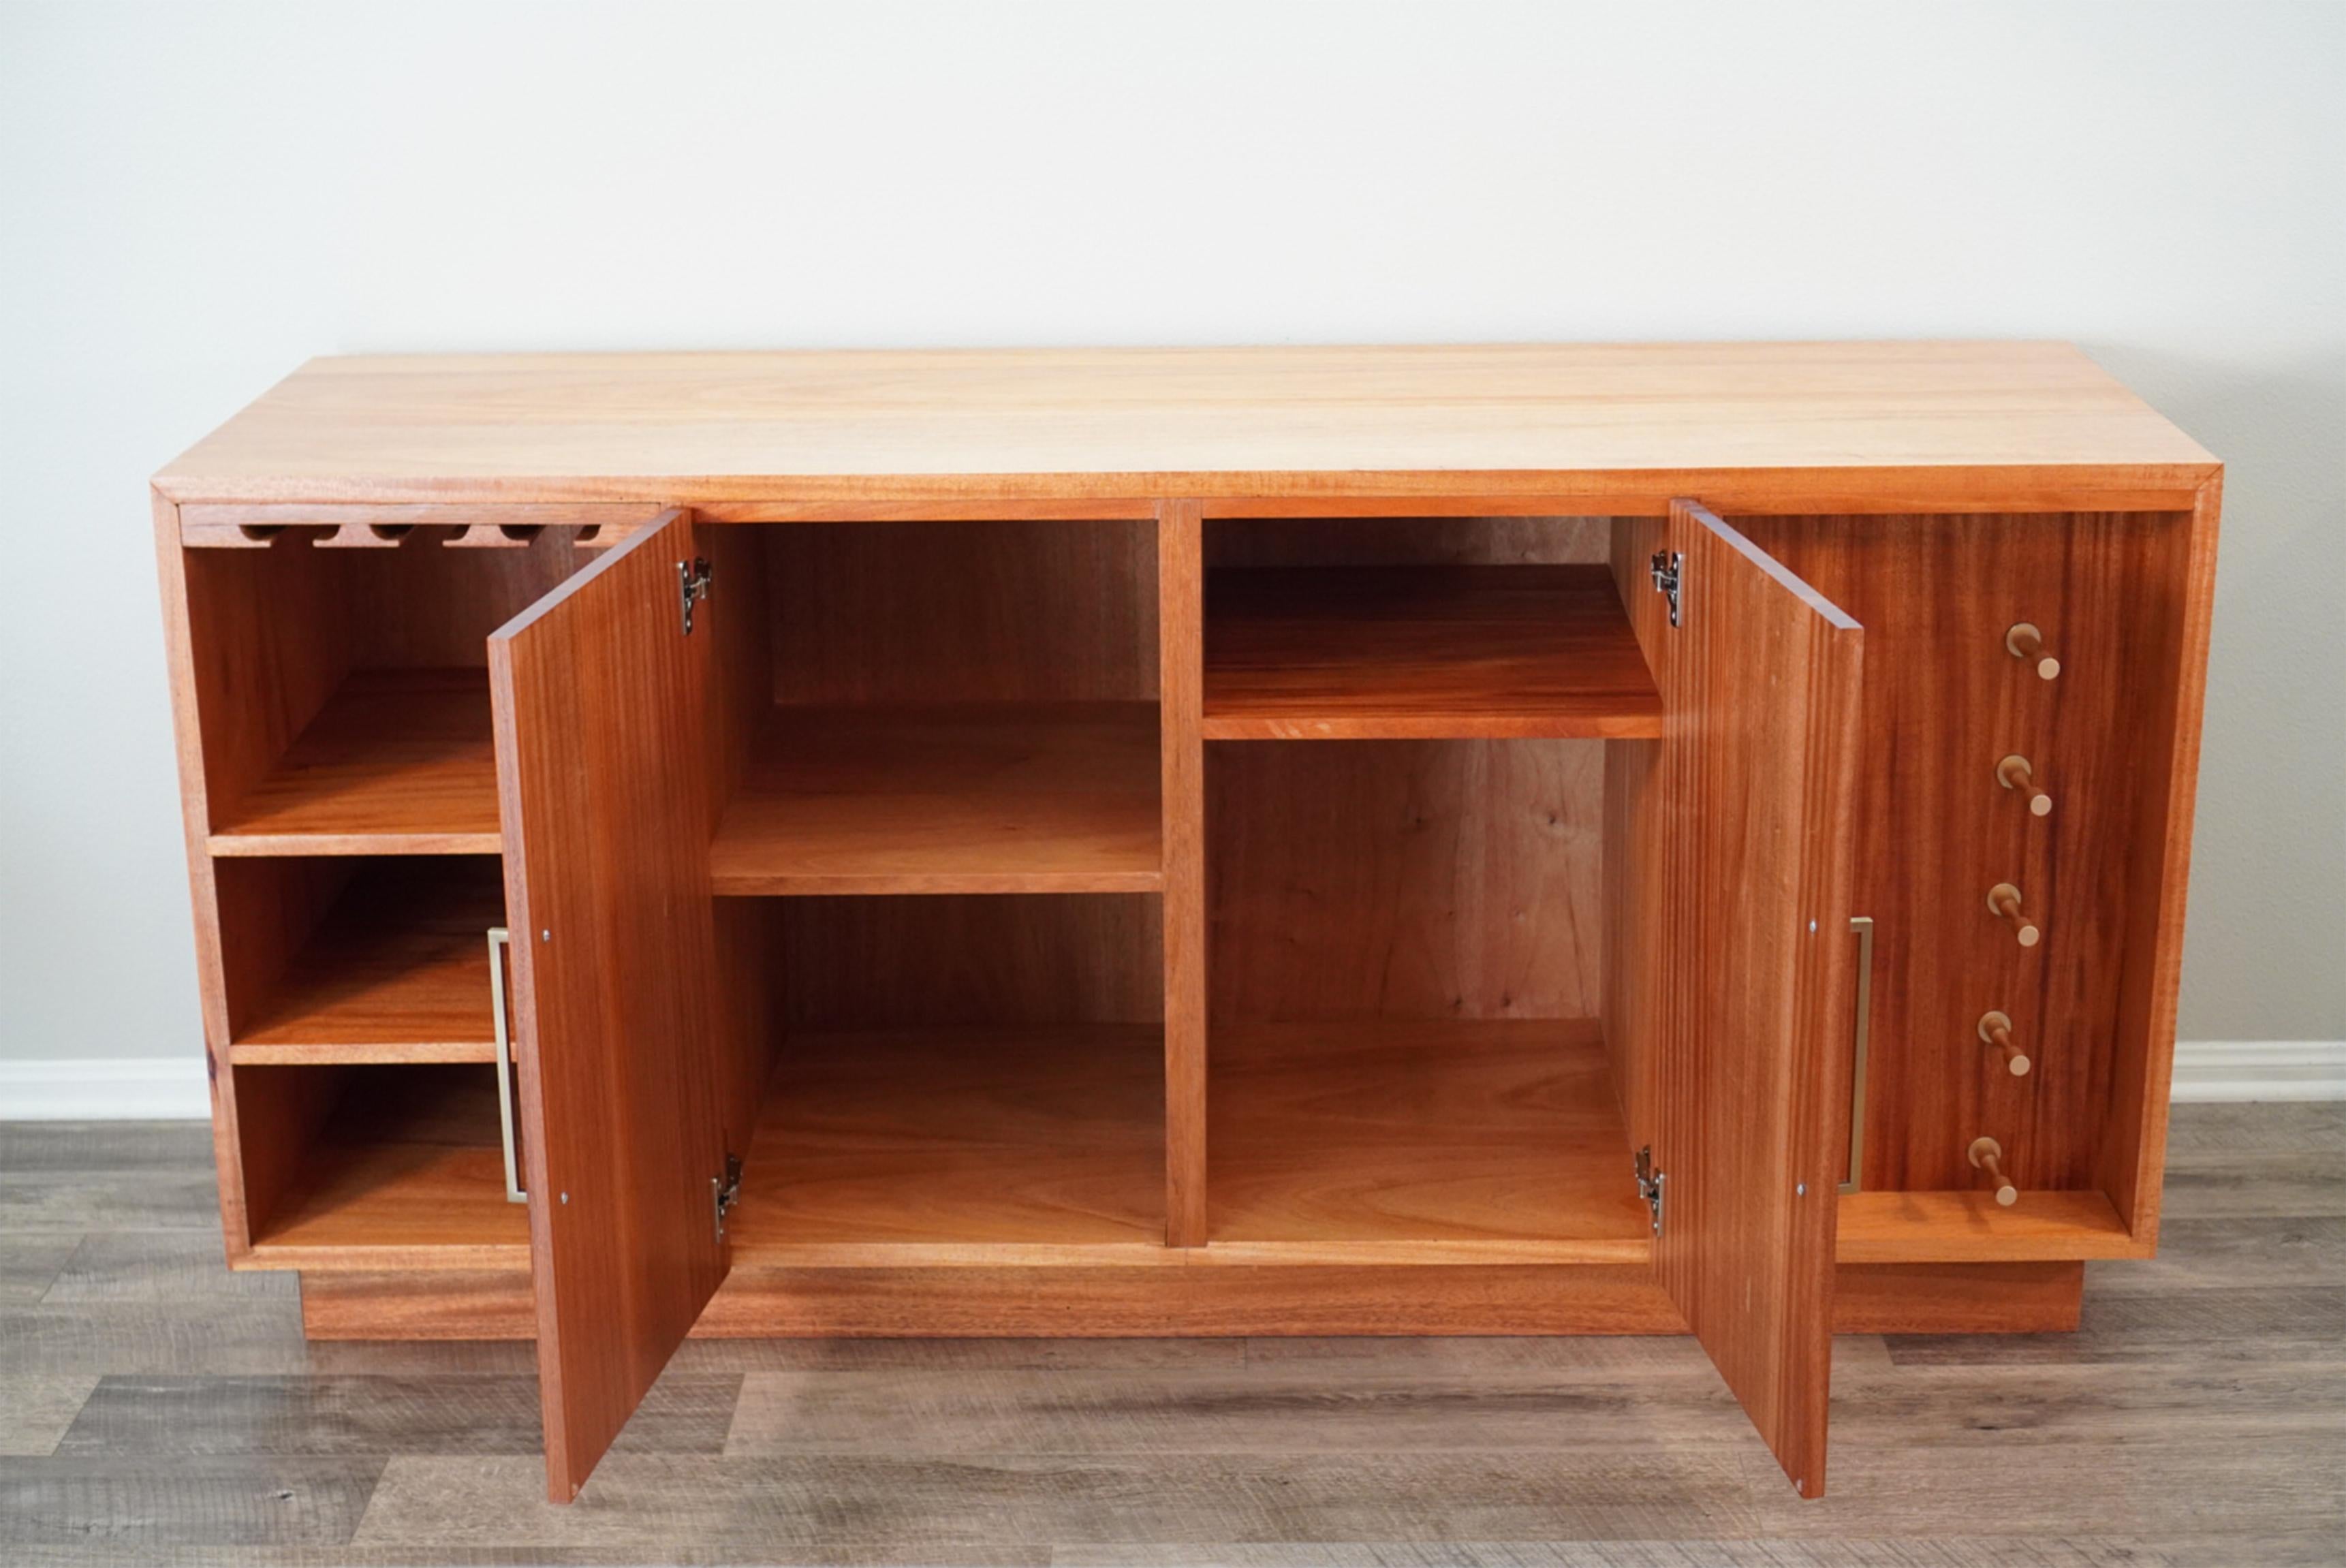 21st Century Mid-Century Modern Inspired Sapele Sideboard Wine & Liquor Cabinet  In New Condition For Sale In Oakhurst, NJ